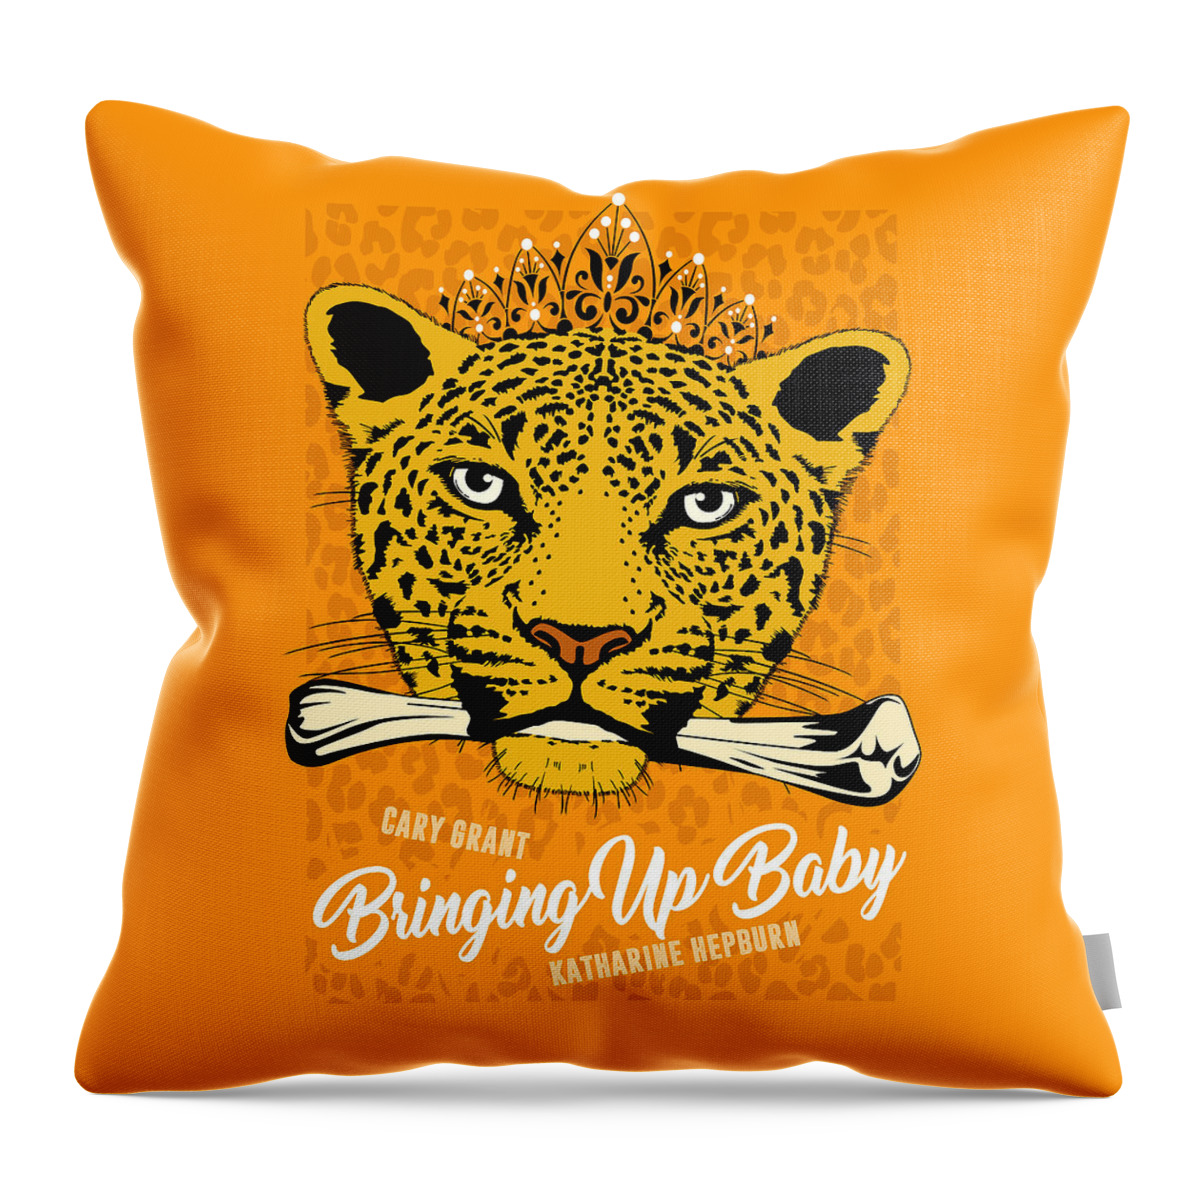 Movie Poster Throw Pillow featuring the digital art Bringing Up Baby - Alternative Movie Poster by Movie Poster Boy